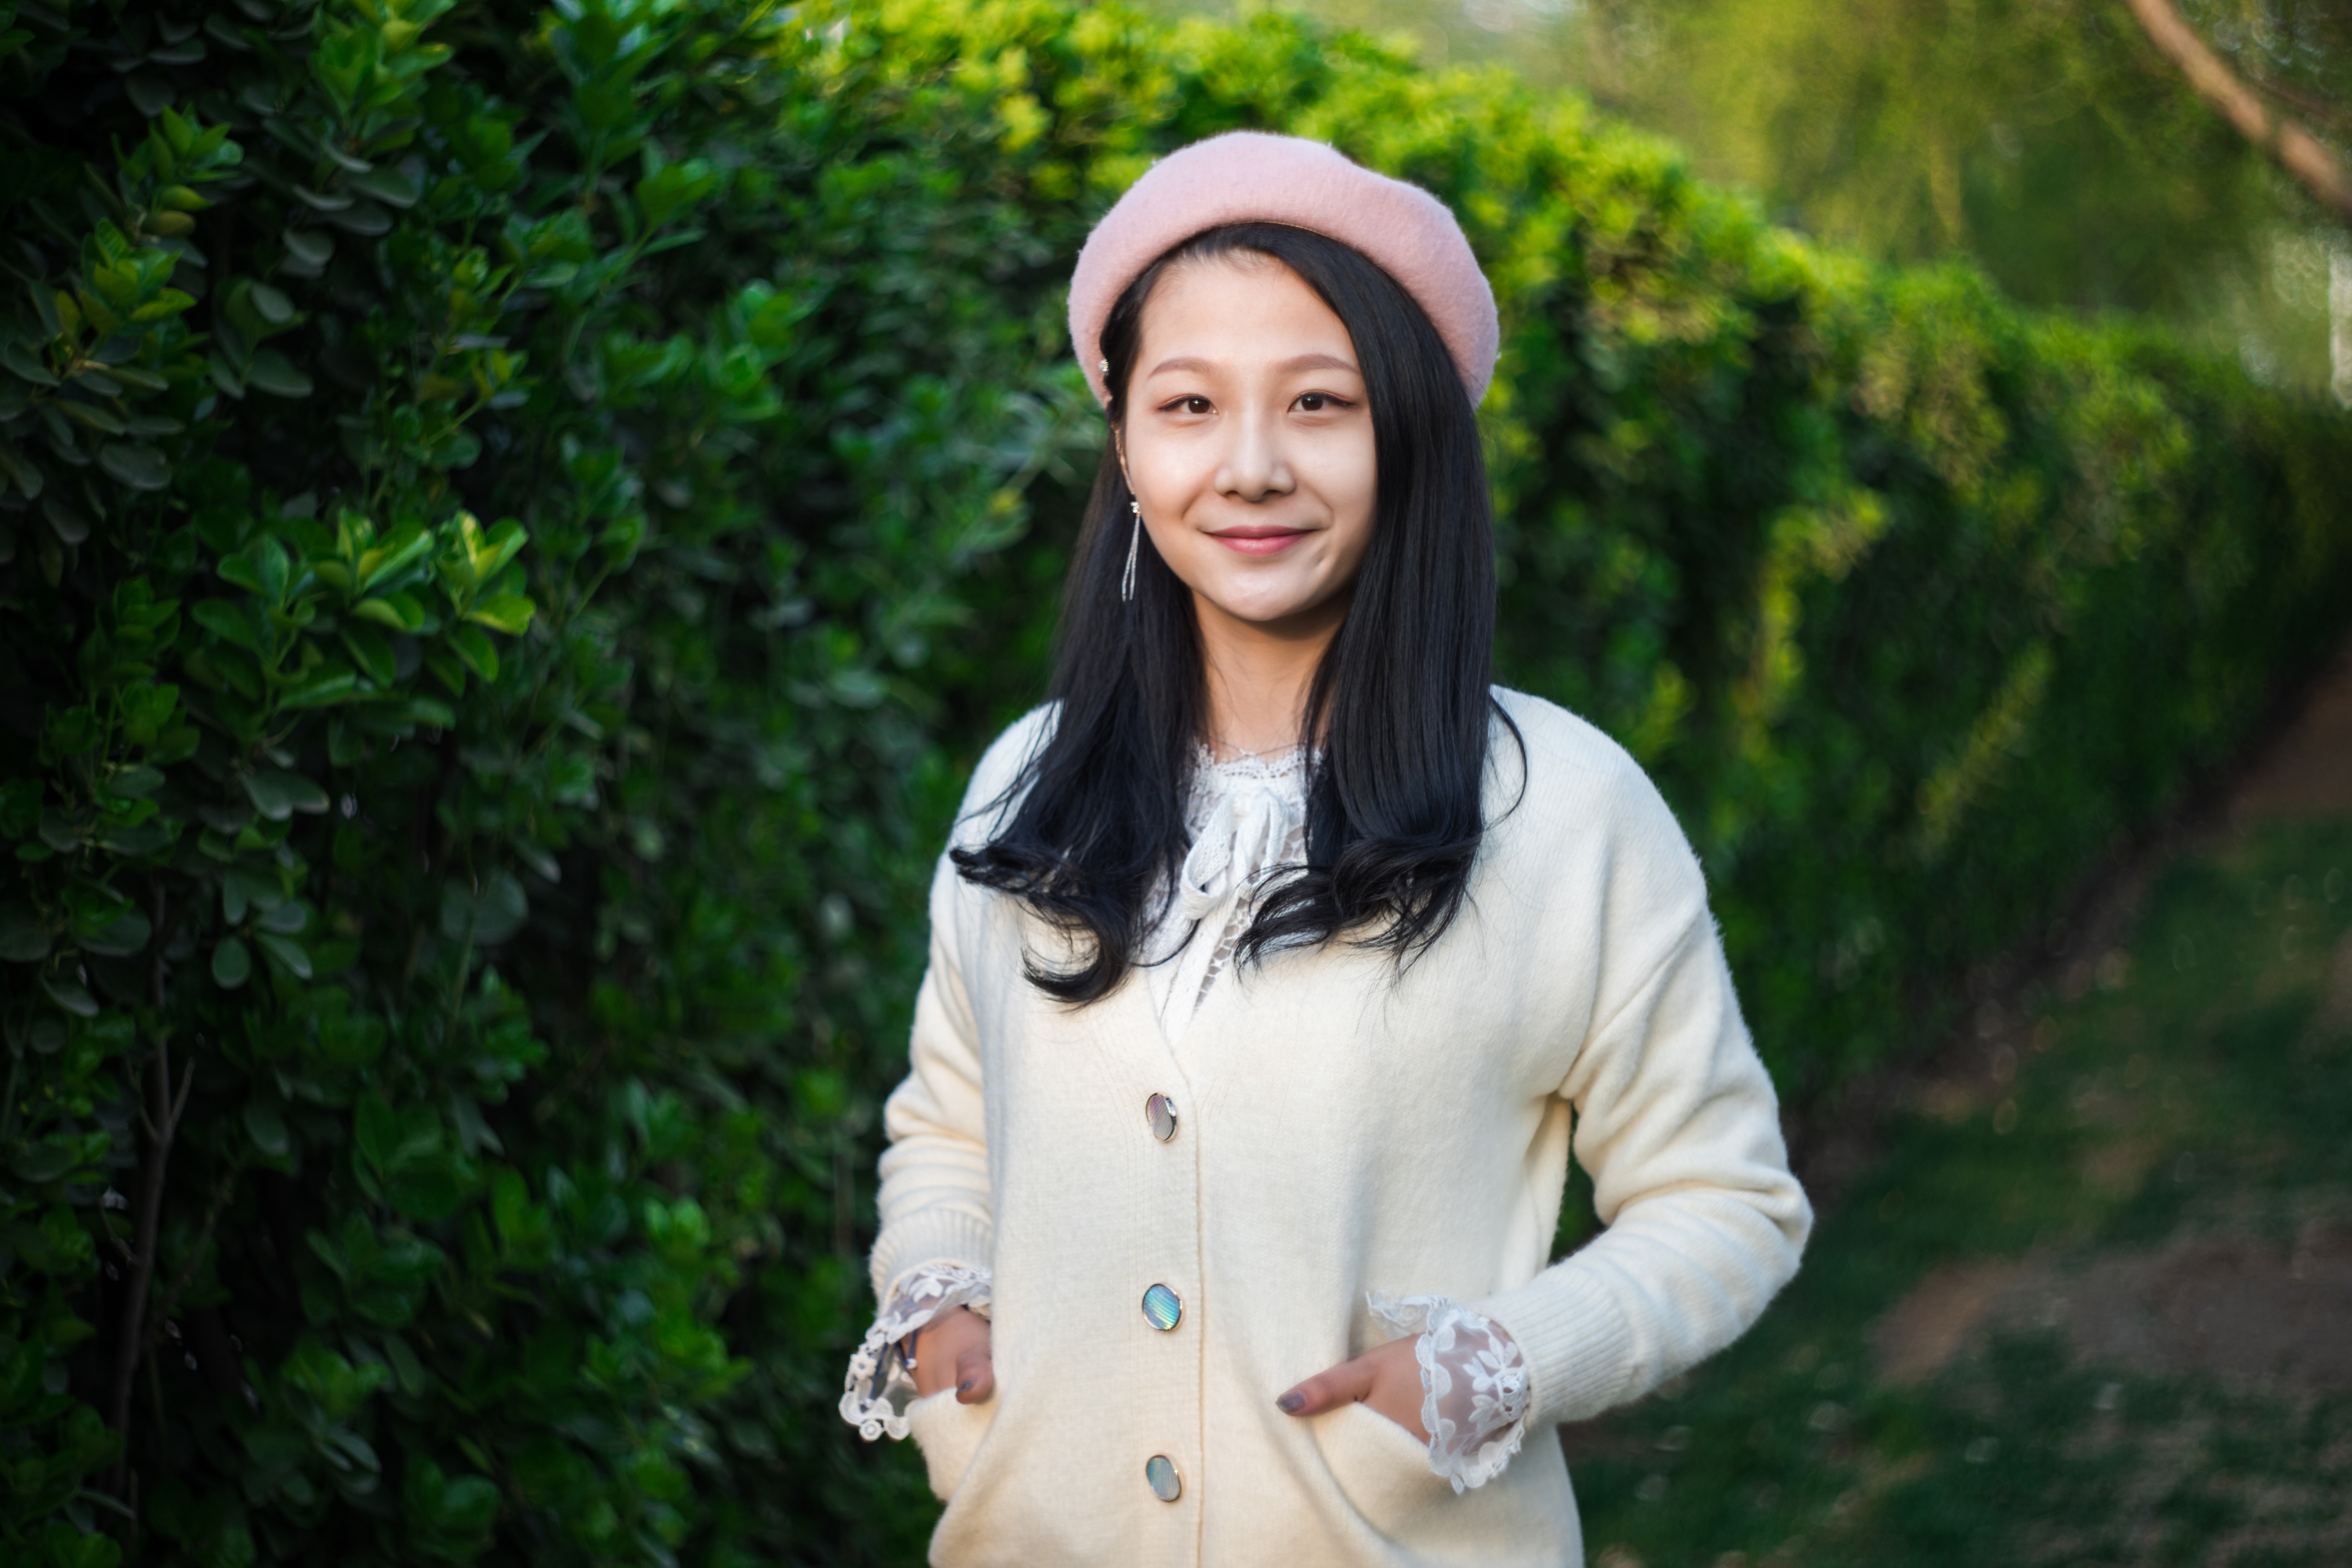 A tween or teen girl with dark hair and tan skin stands in front of tall green bushes wearing a pink beret and cream sweater and smiles practicing affirmations.